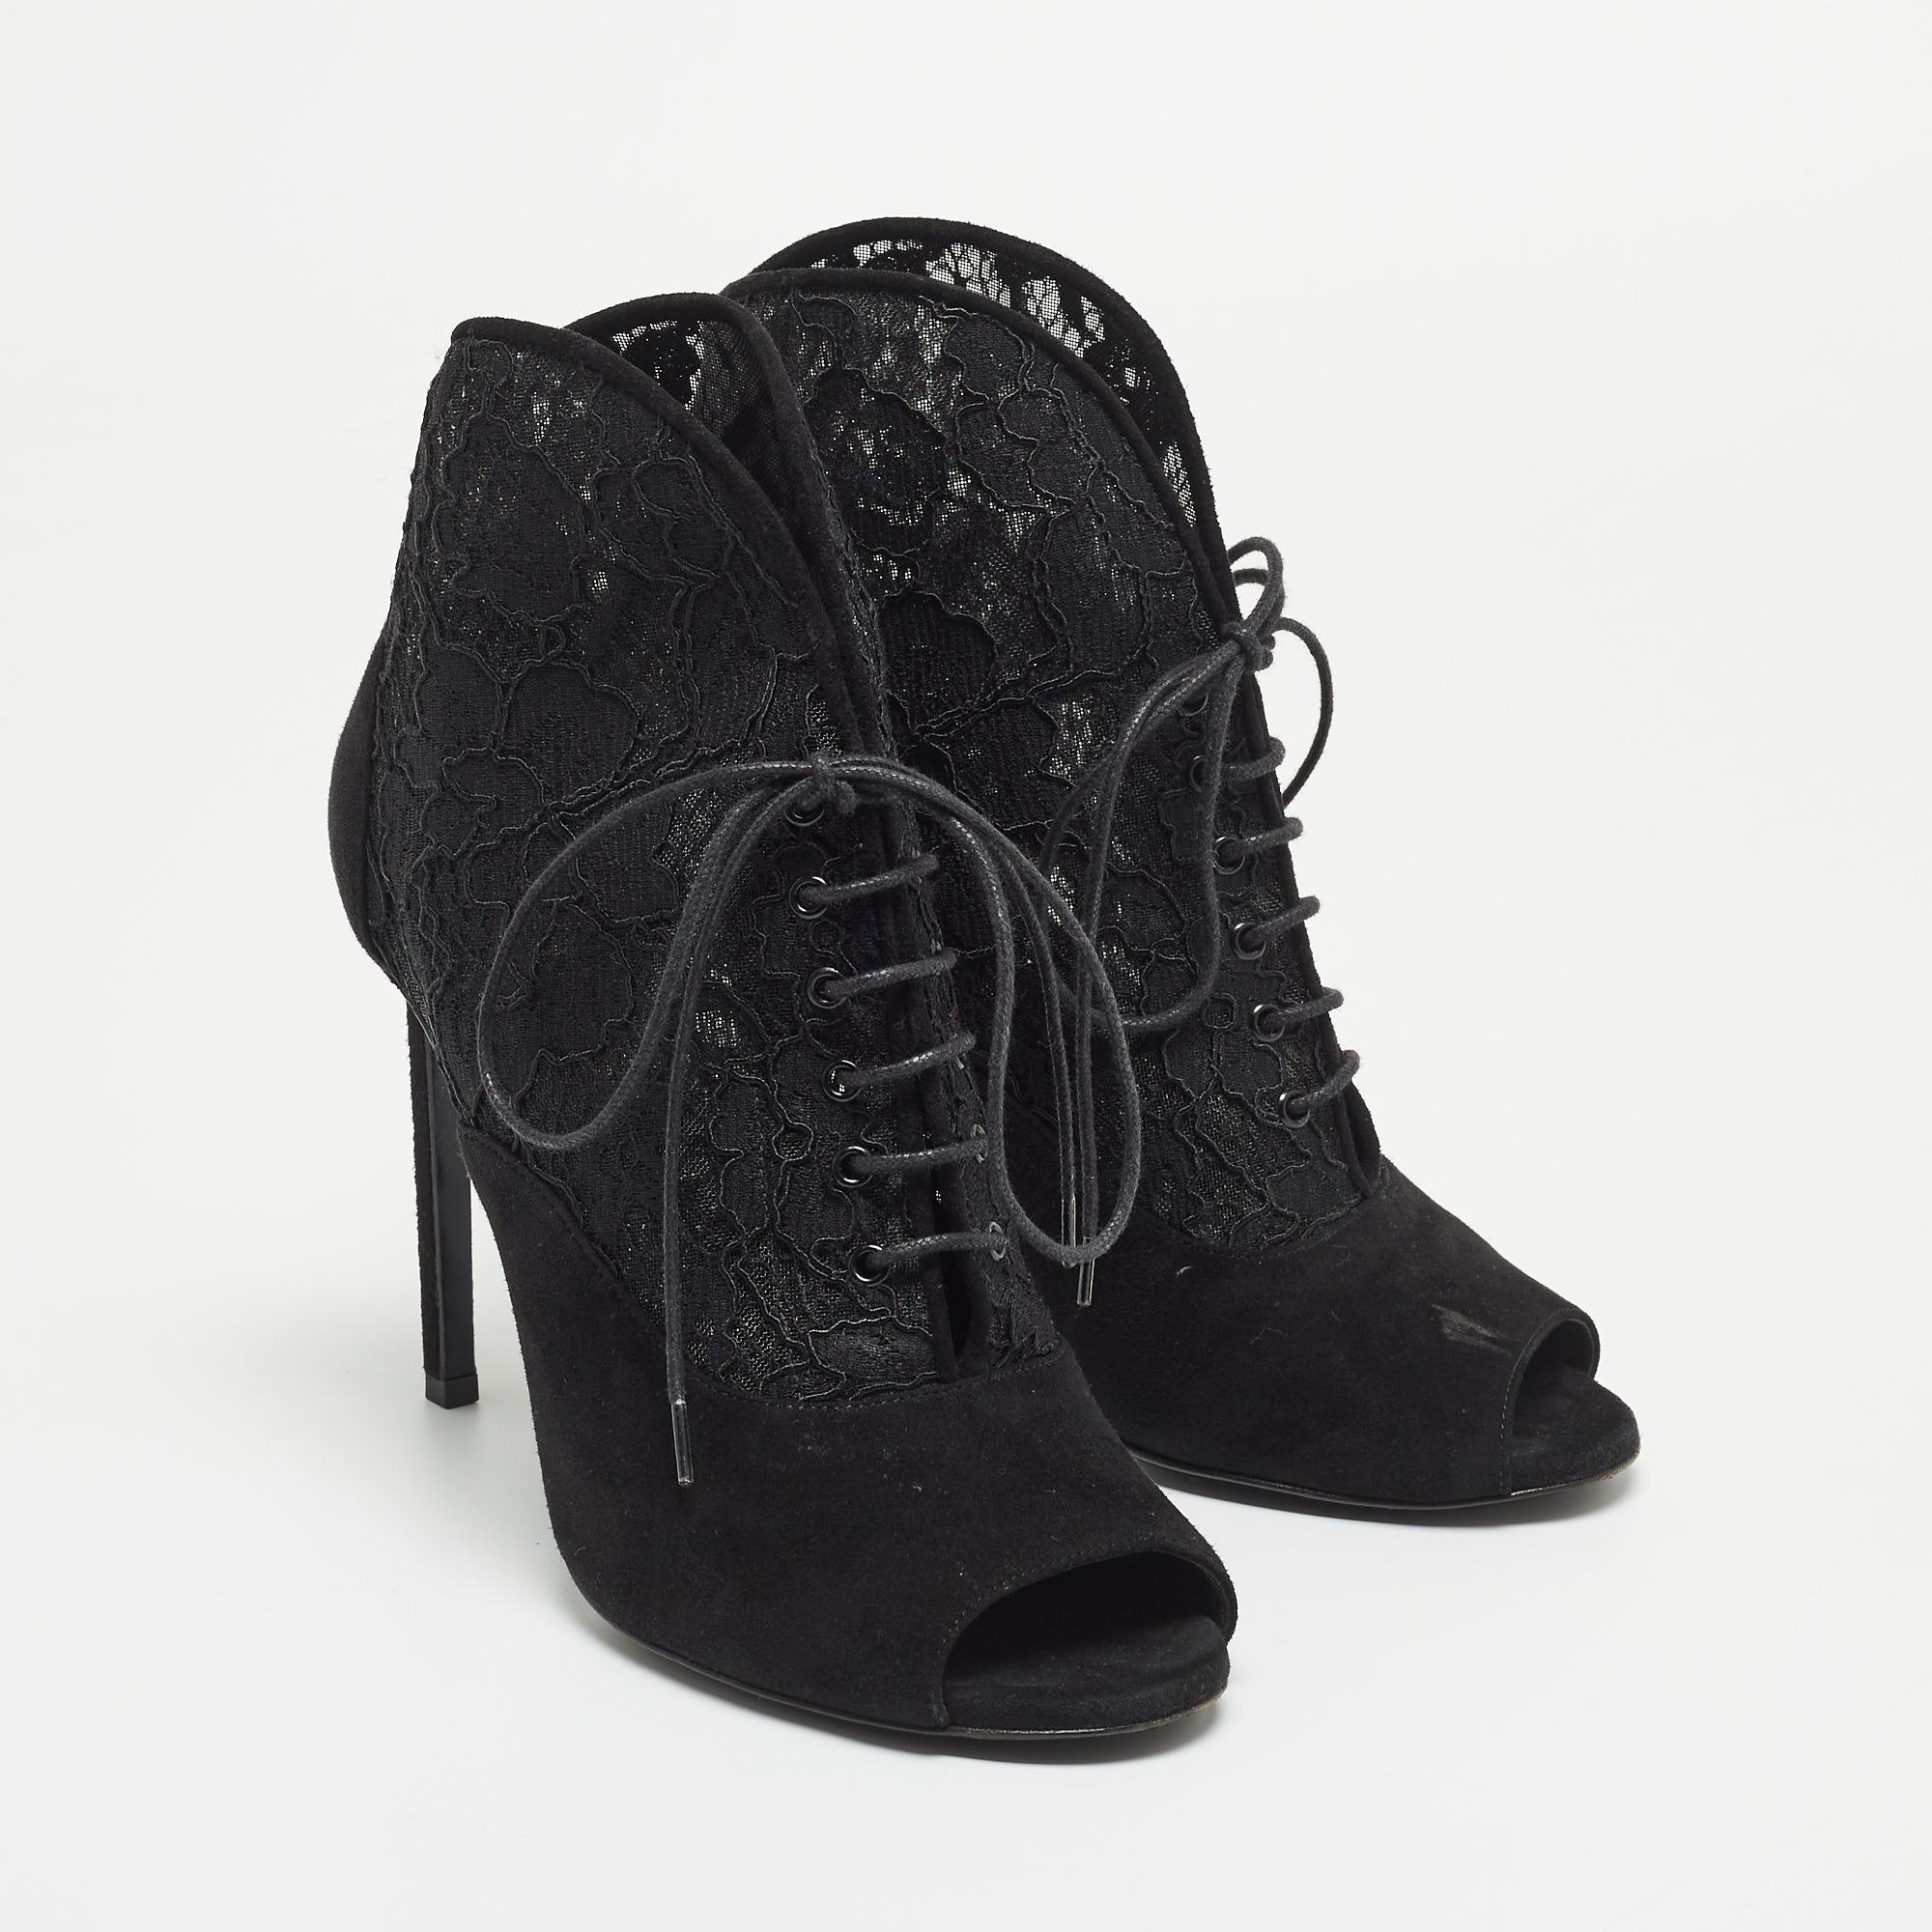 Saint Laurent Black Suede And Lace Open Toe Ankle Booties Size 39.5